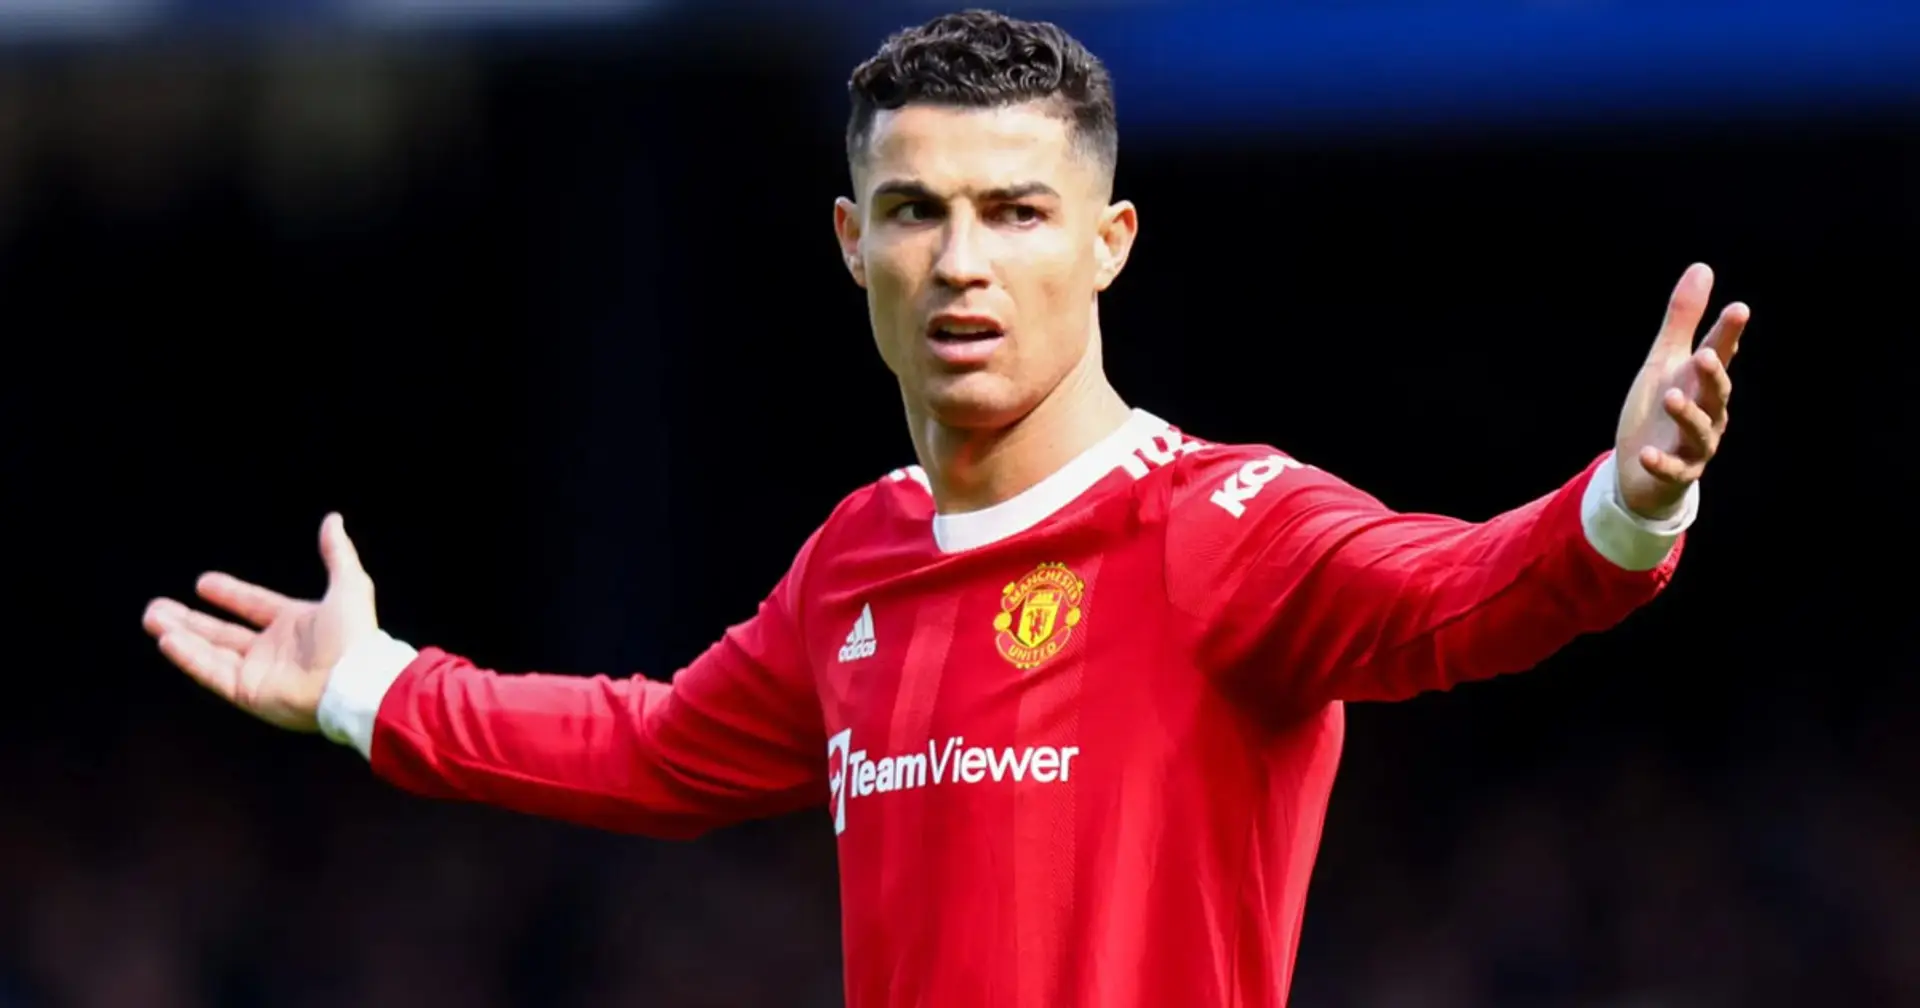 Senior United figures want Ronaldo to be sold if Ten Hag takes over (reliability: 3 stars)